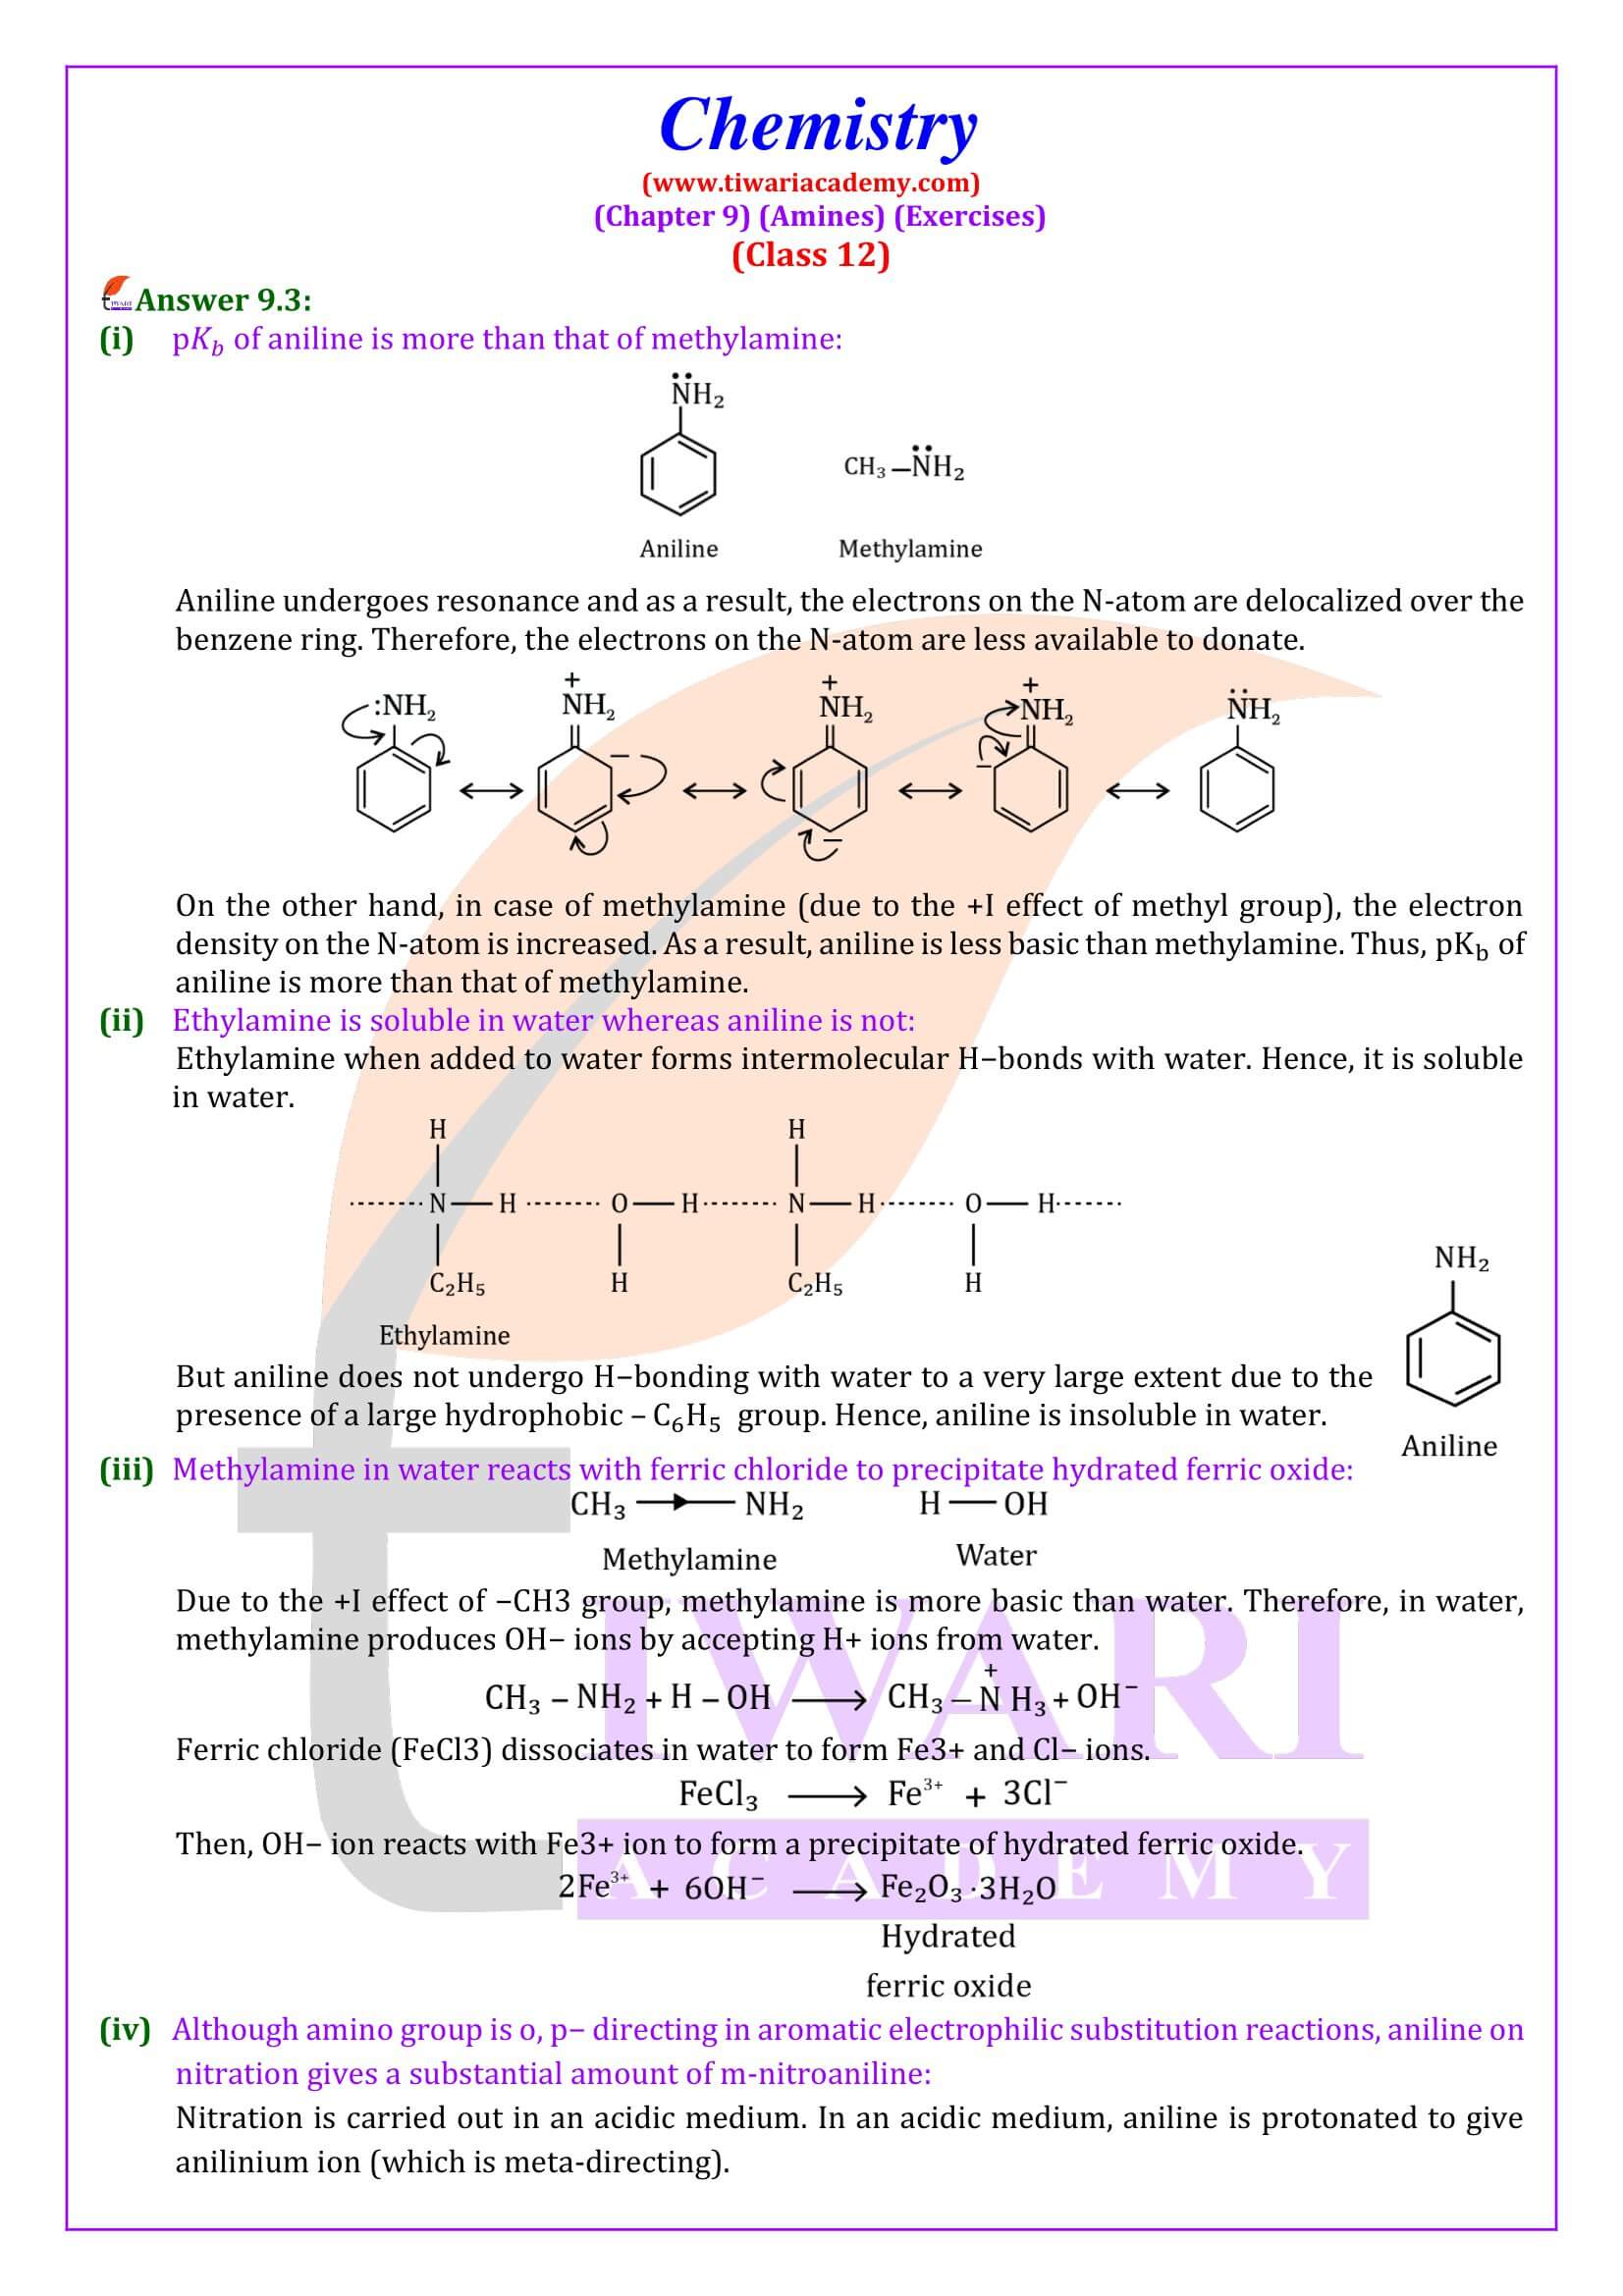 NCERT Solutions for Class 12 Chemistry Chapter 9 in English medium